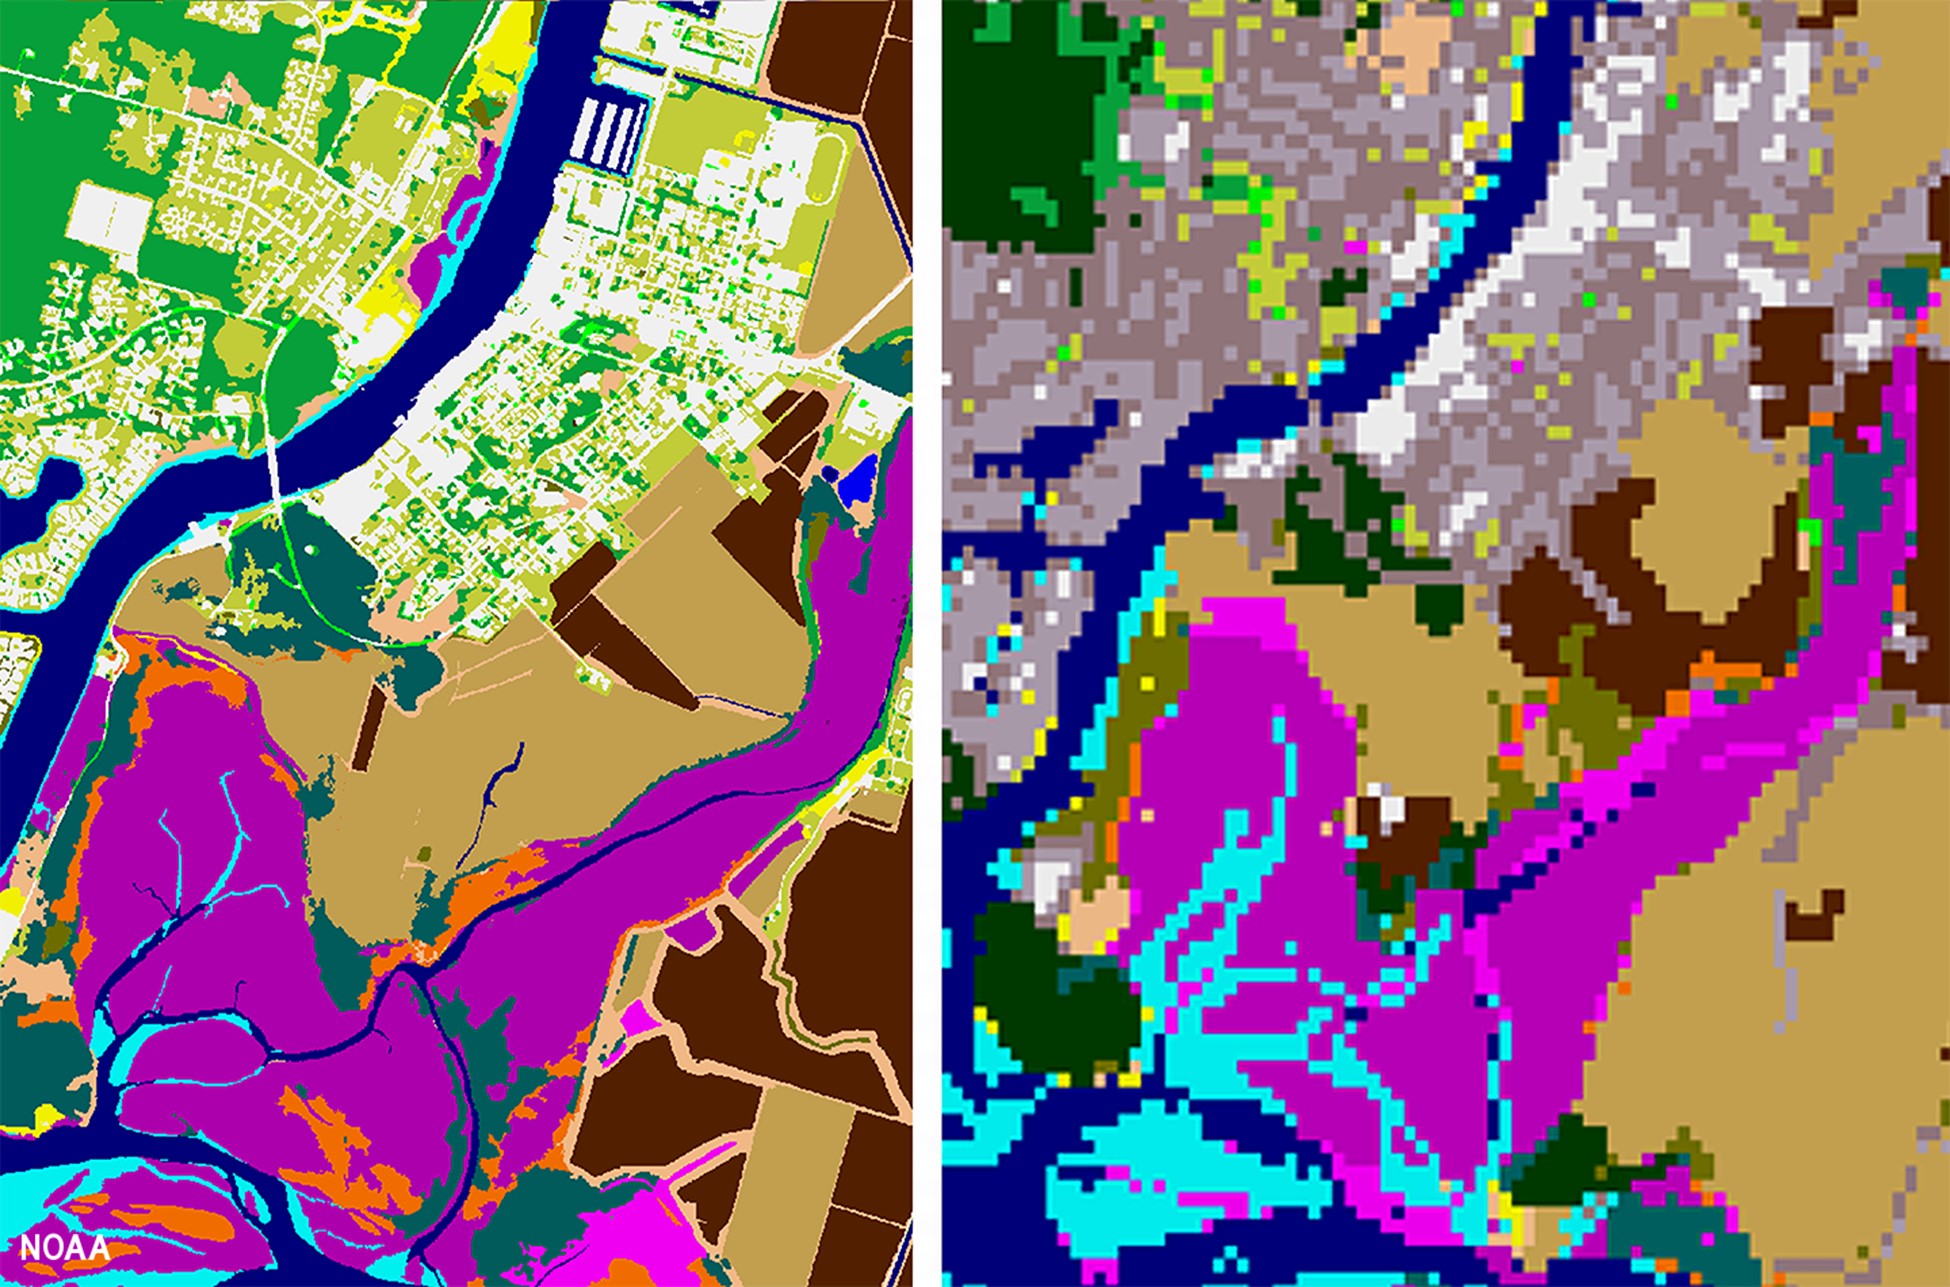 High-resolution land cover data.